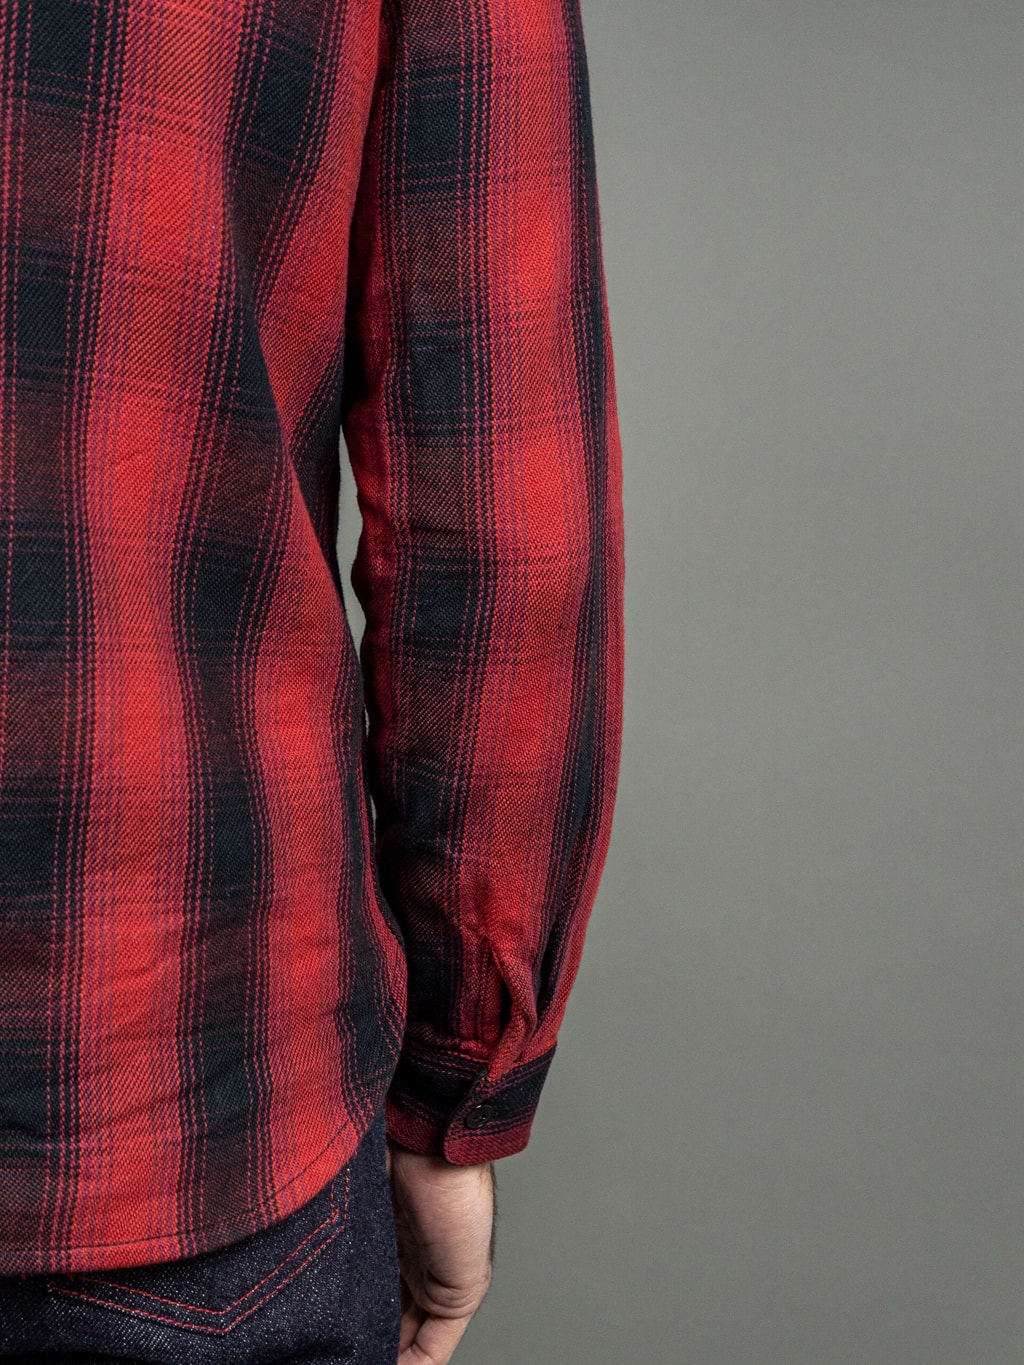 The flat head flannel shirt red work sleeve detail